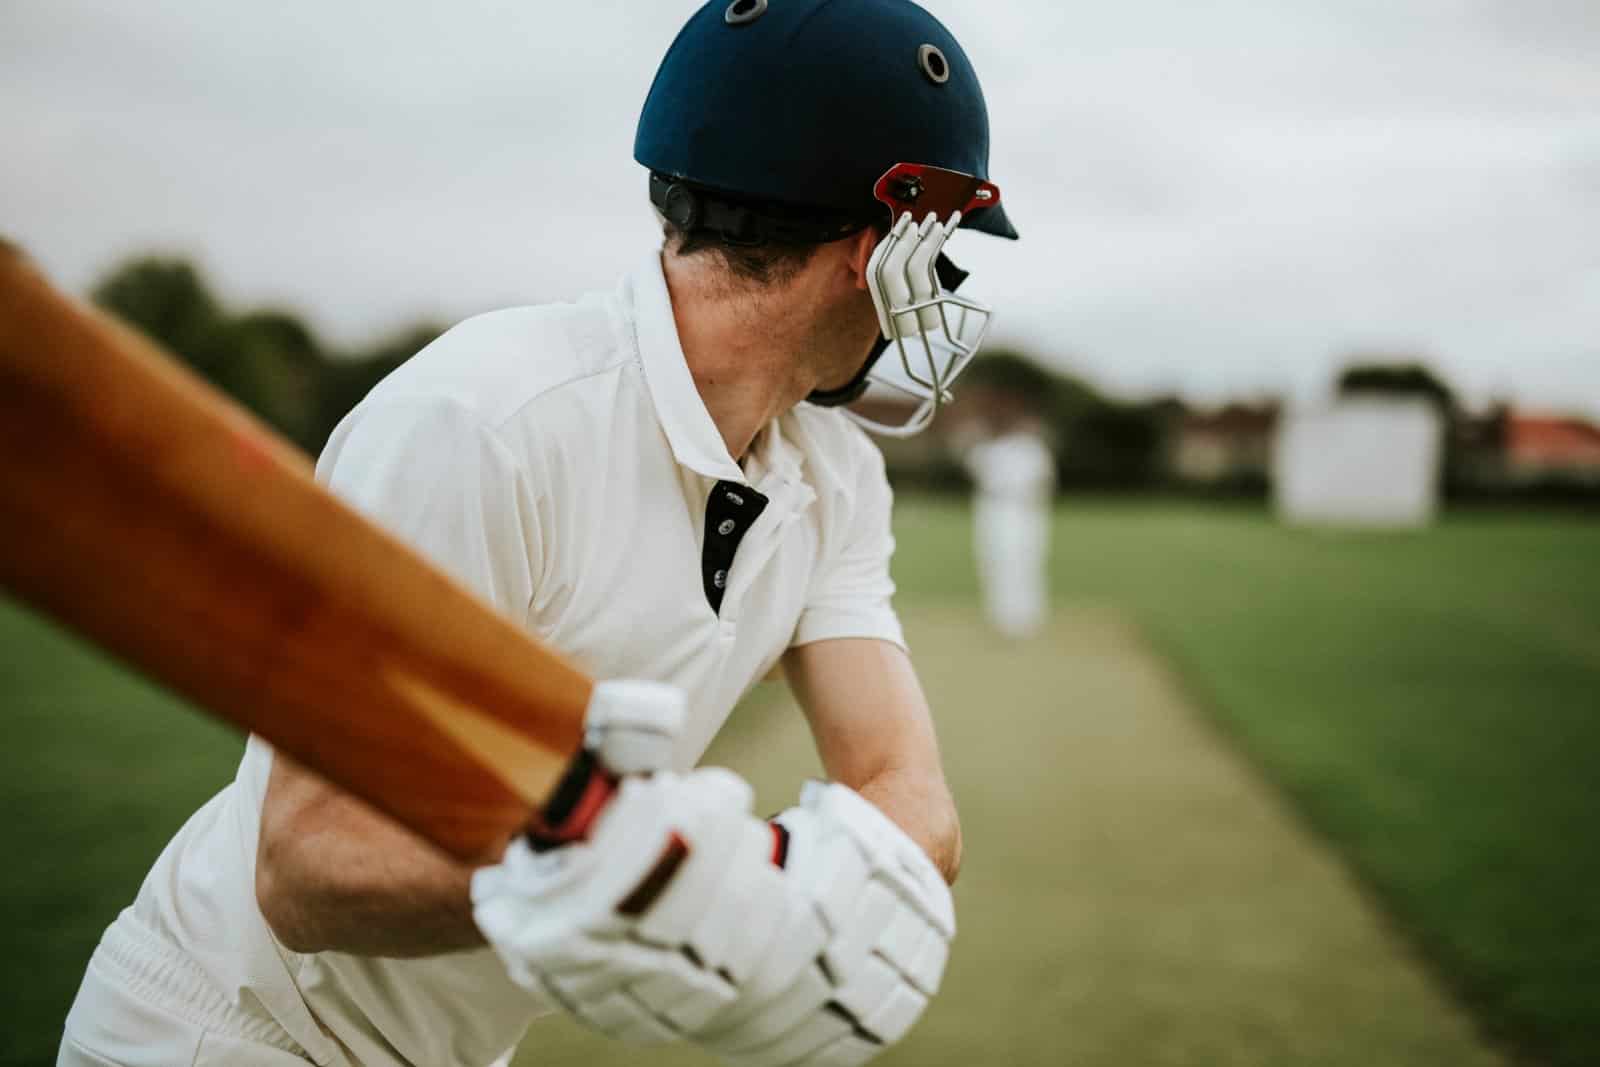 <p class="wp-caption-text">Image Credit: Shutterstock / Rawpixel.com</p>  <p>Instead of searching for a place to watch American football, why not try getting into soccer, cricket, or rugby? It’s a great way to immerse yourself in the local culture and camaraderie.</p>